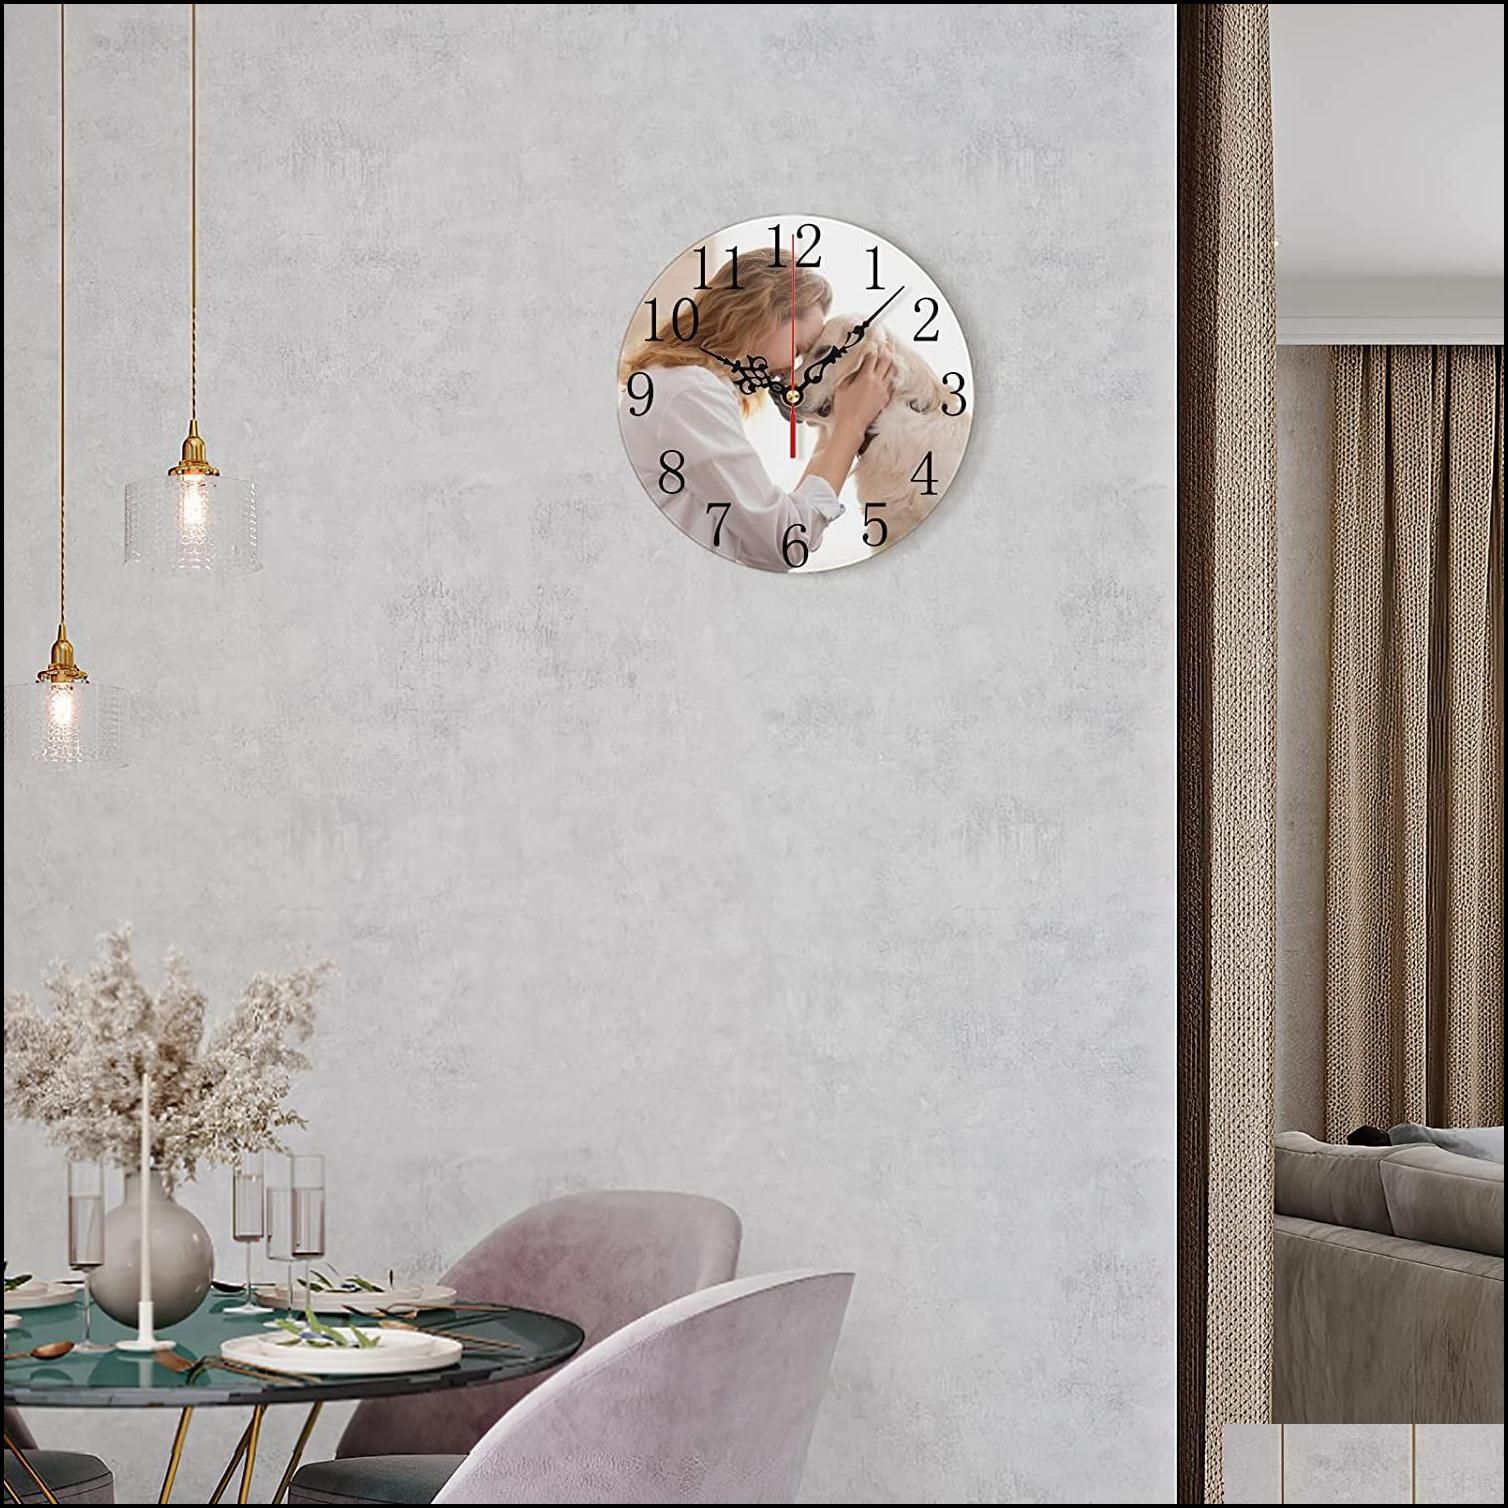 Wholesale Sublimation Blanks Sublimation Blank Wall Clock Mdf Round Clocks  Blanks Silent Non Ticking Decorative Battery Operated For Diy Drop D Dhkg9  From Dayupshop, $4.32